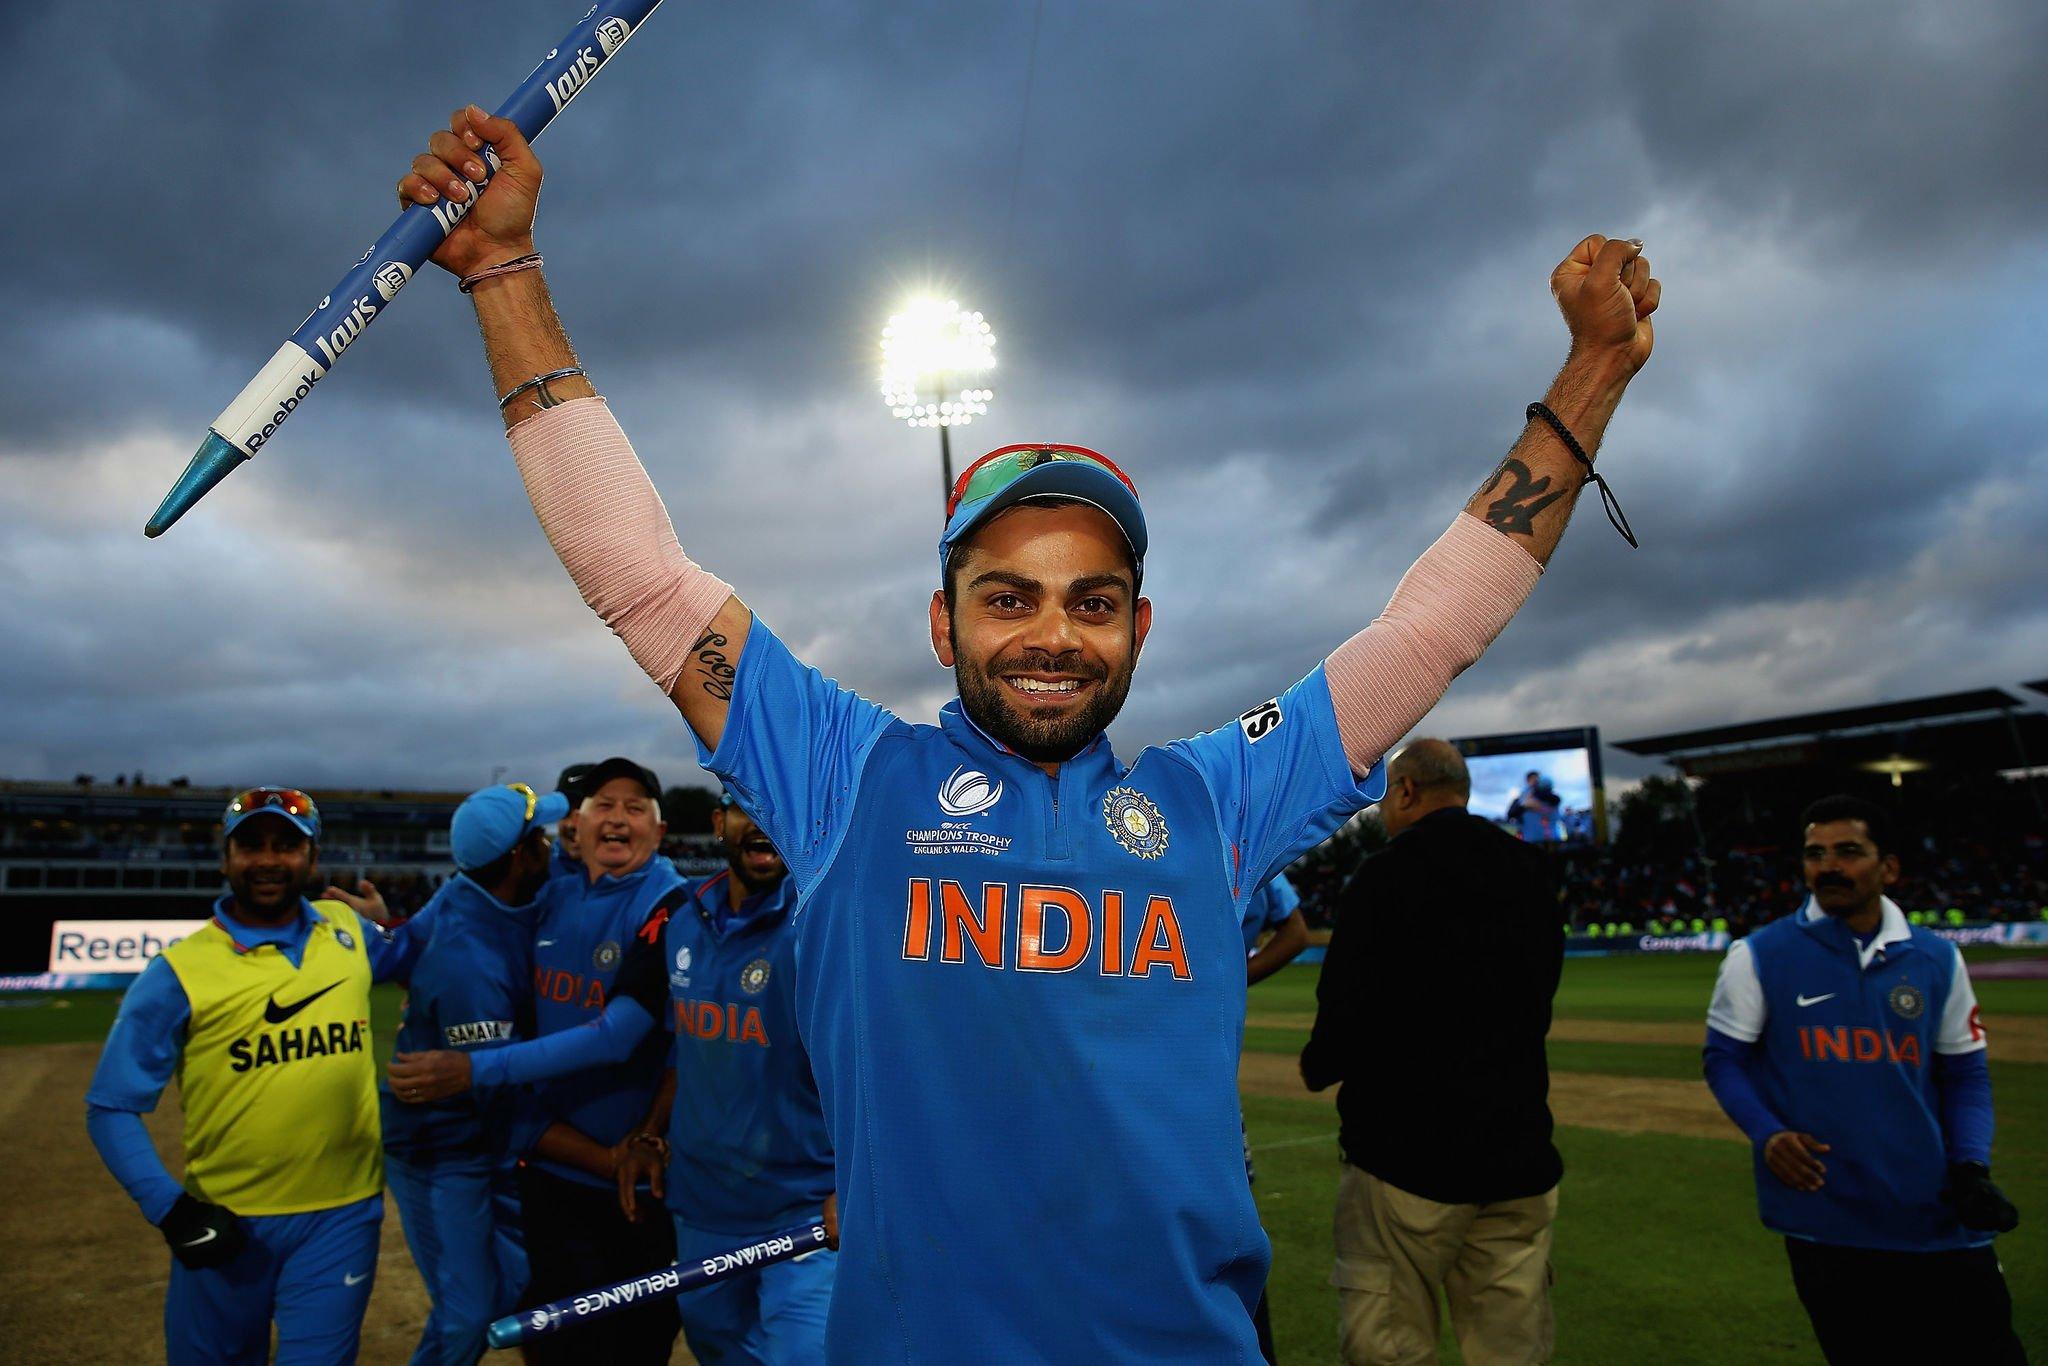 'Win World Cup For Virat' - Virender Sehwag Draws Comparison Between Sachin Tendulkar And His Successor